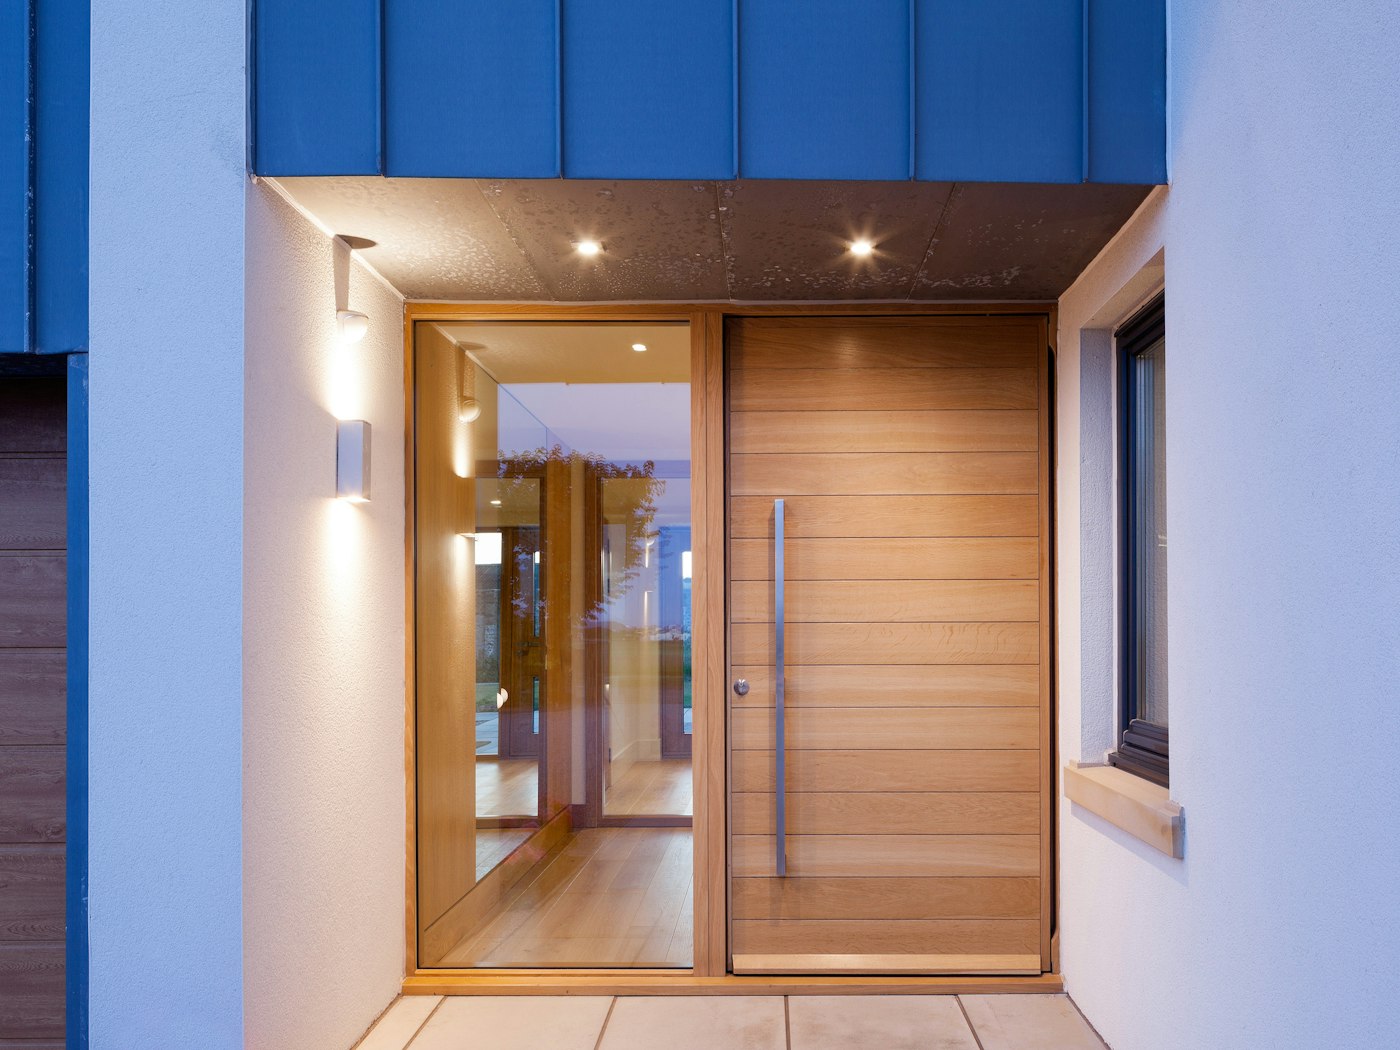 The Parma front door has a glass side panel that complements the glass design in the house